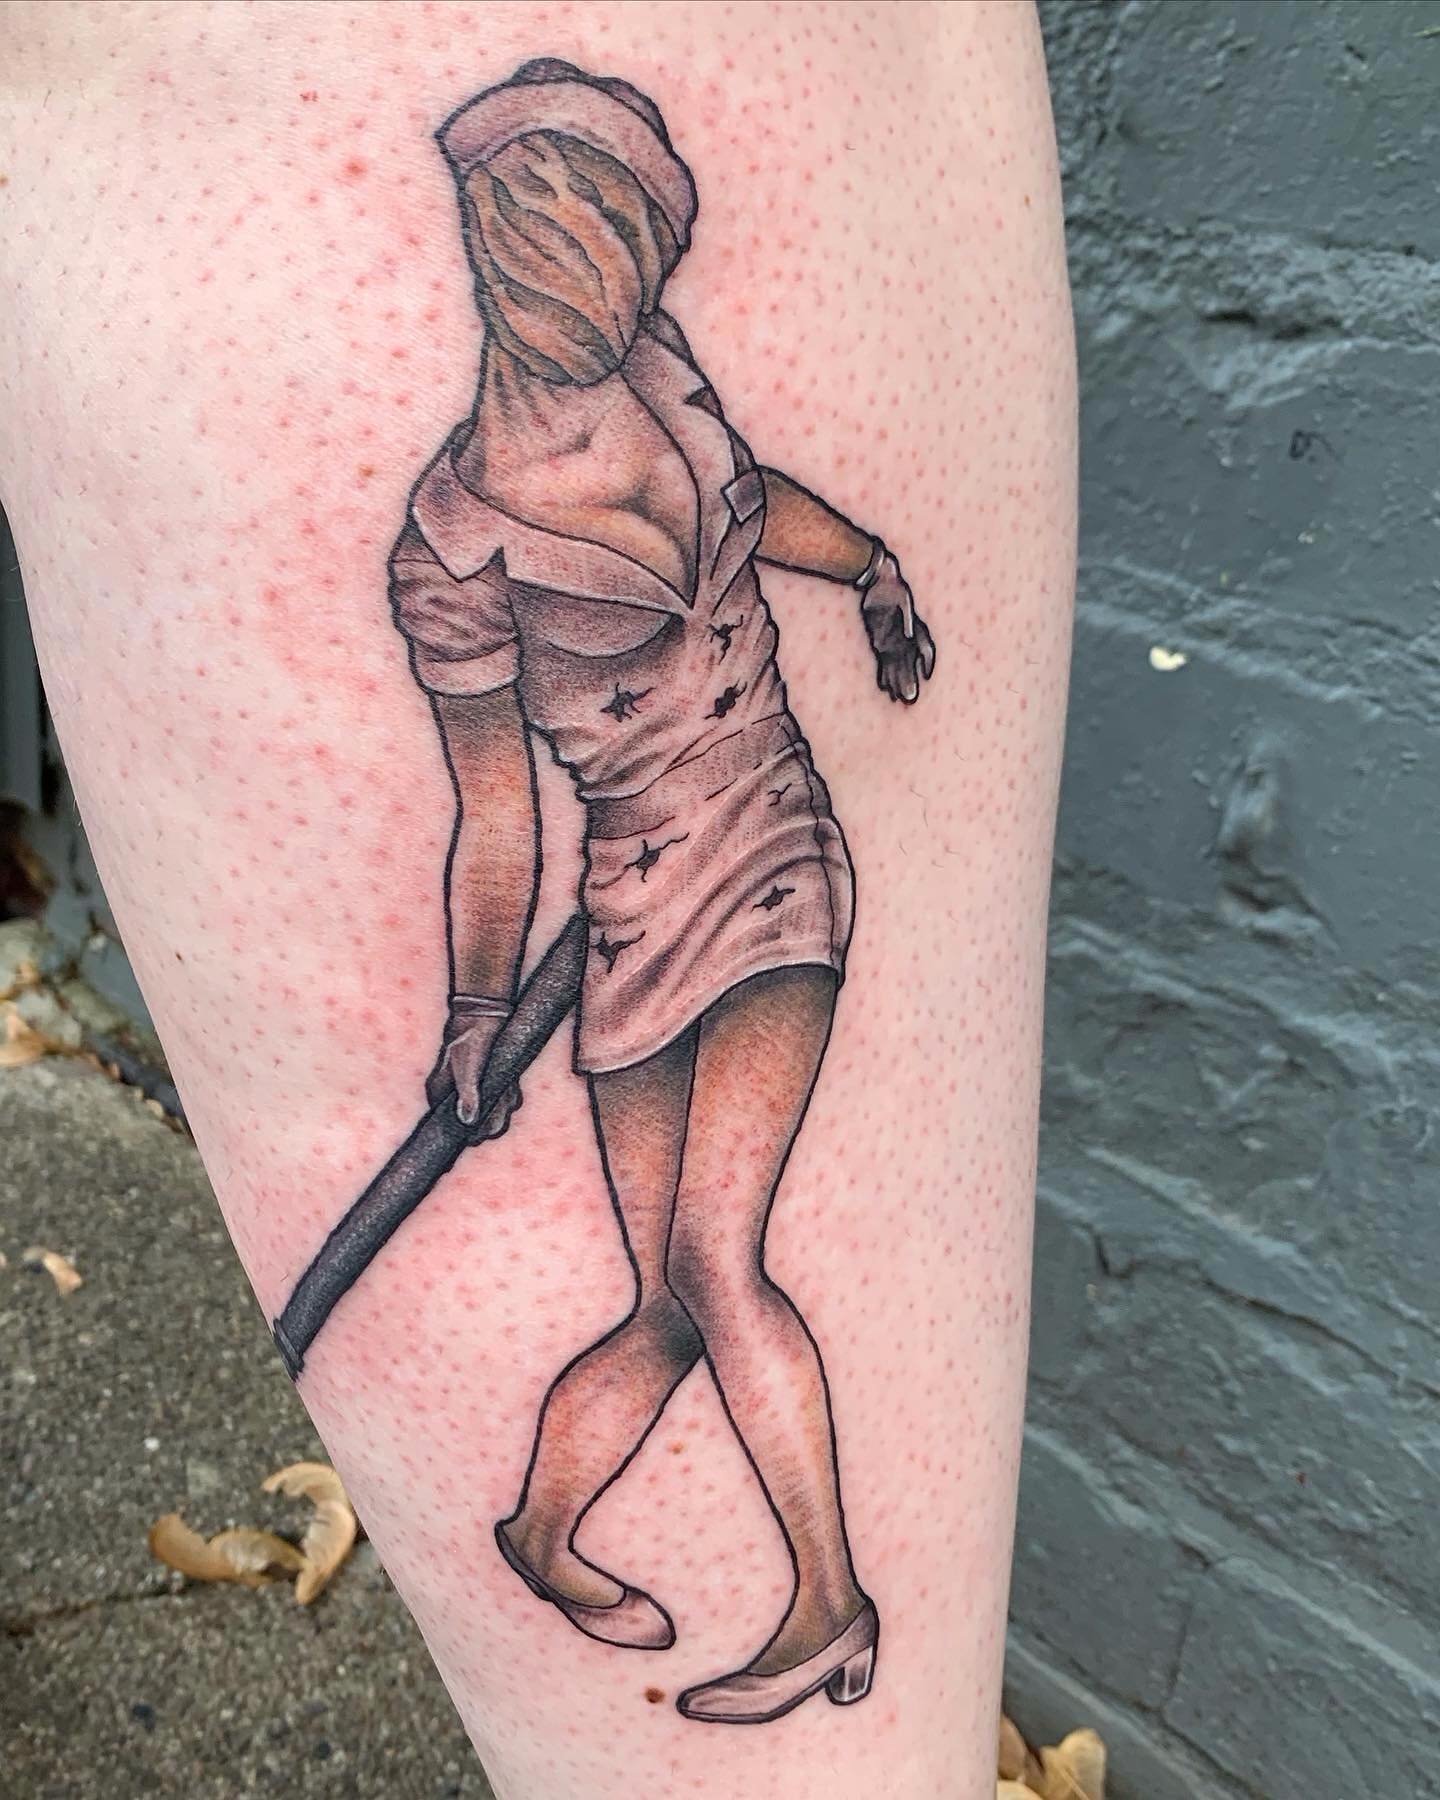 Tattoo by Bruce

Bruce has space for Walk-ins this week, and room for scheduling larger work. Message, call or stop by Temple Tattoo for availability. 

Temple Tattoo Since 1996